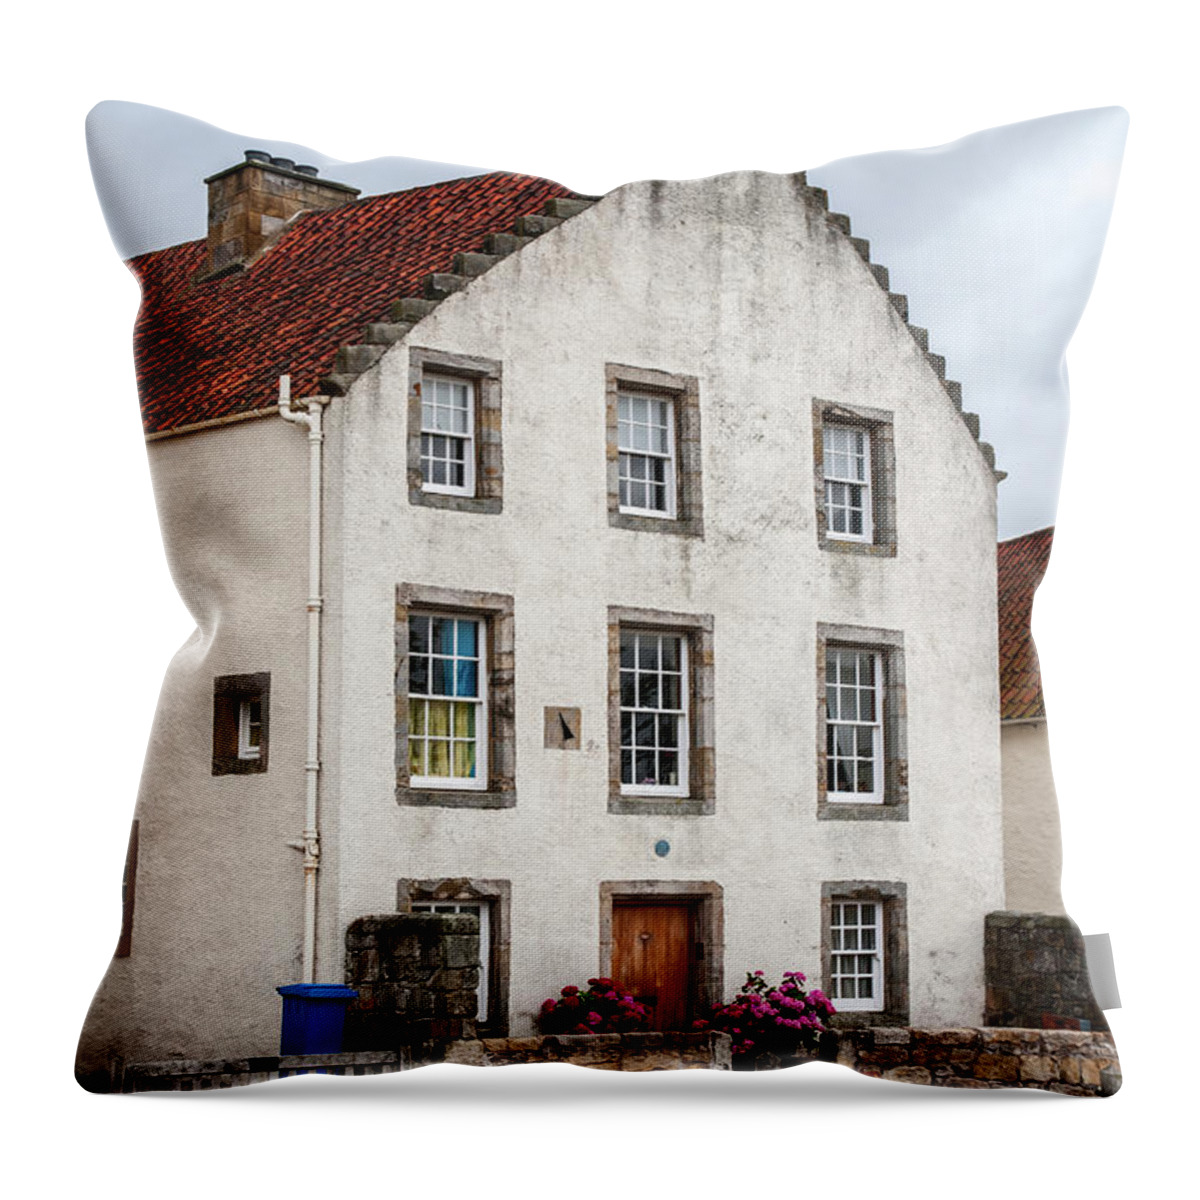  Throw Pillow featuring the photograph Frozen in Time 1. Culross Sketches. Scotland by Jenny Rainbow